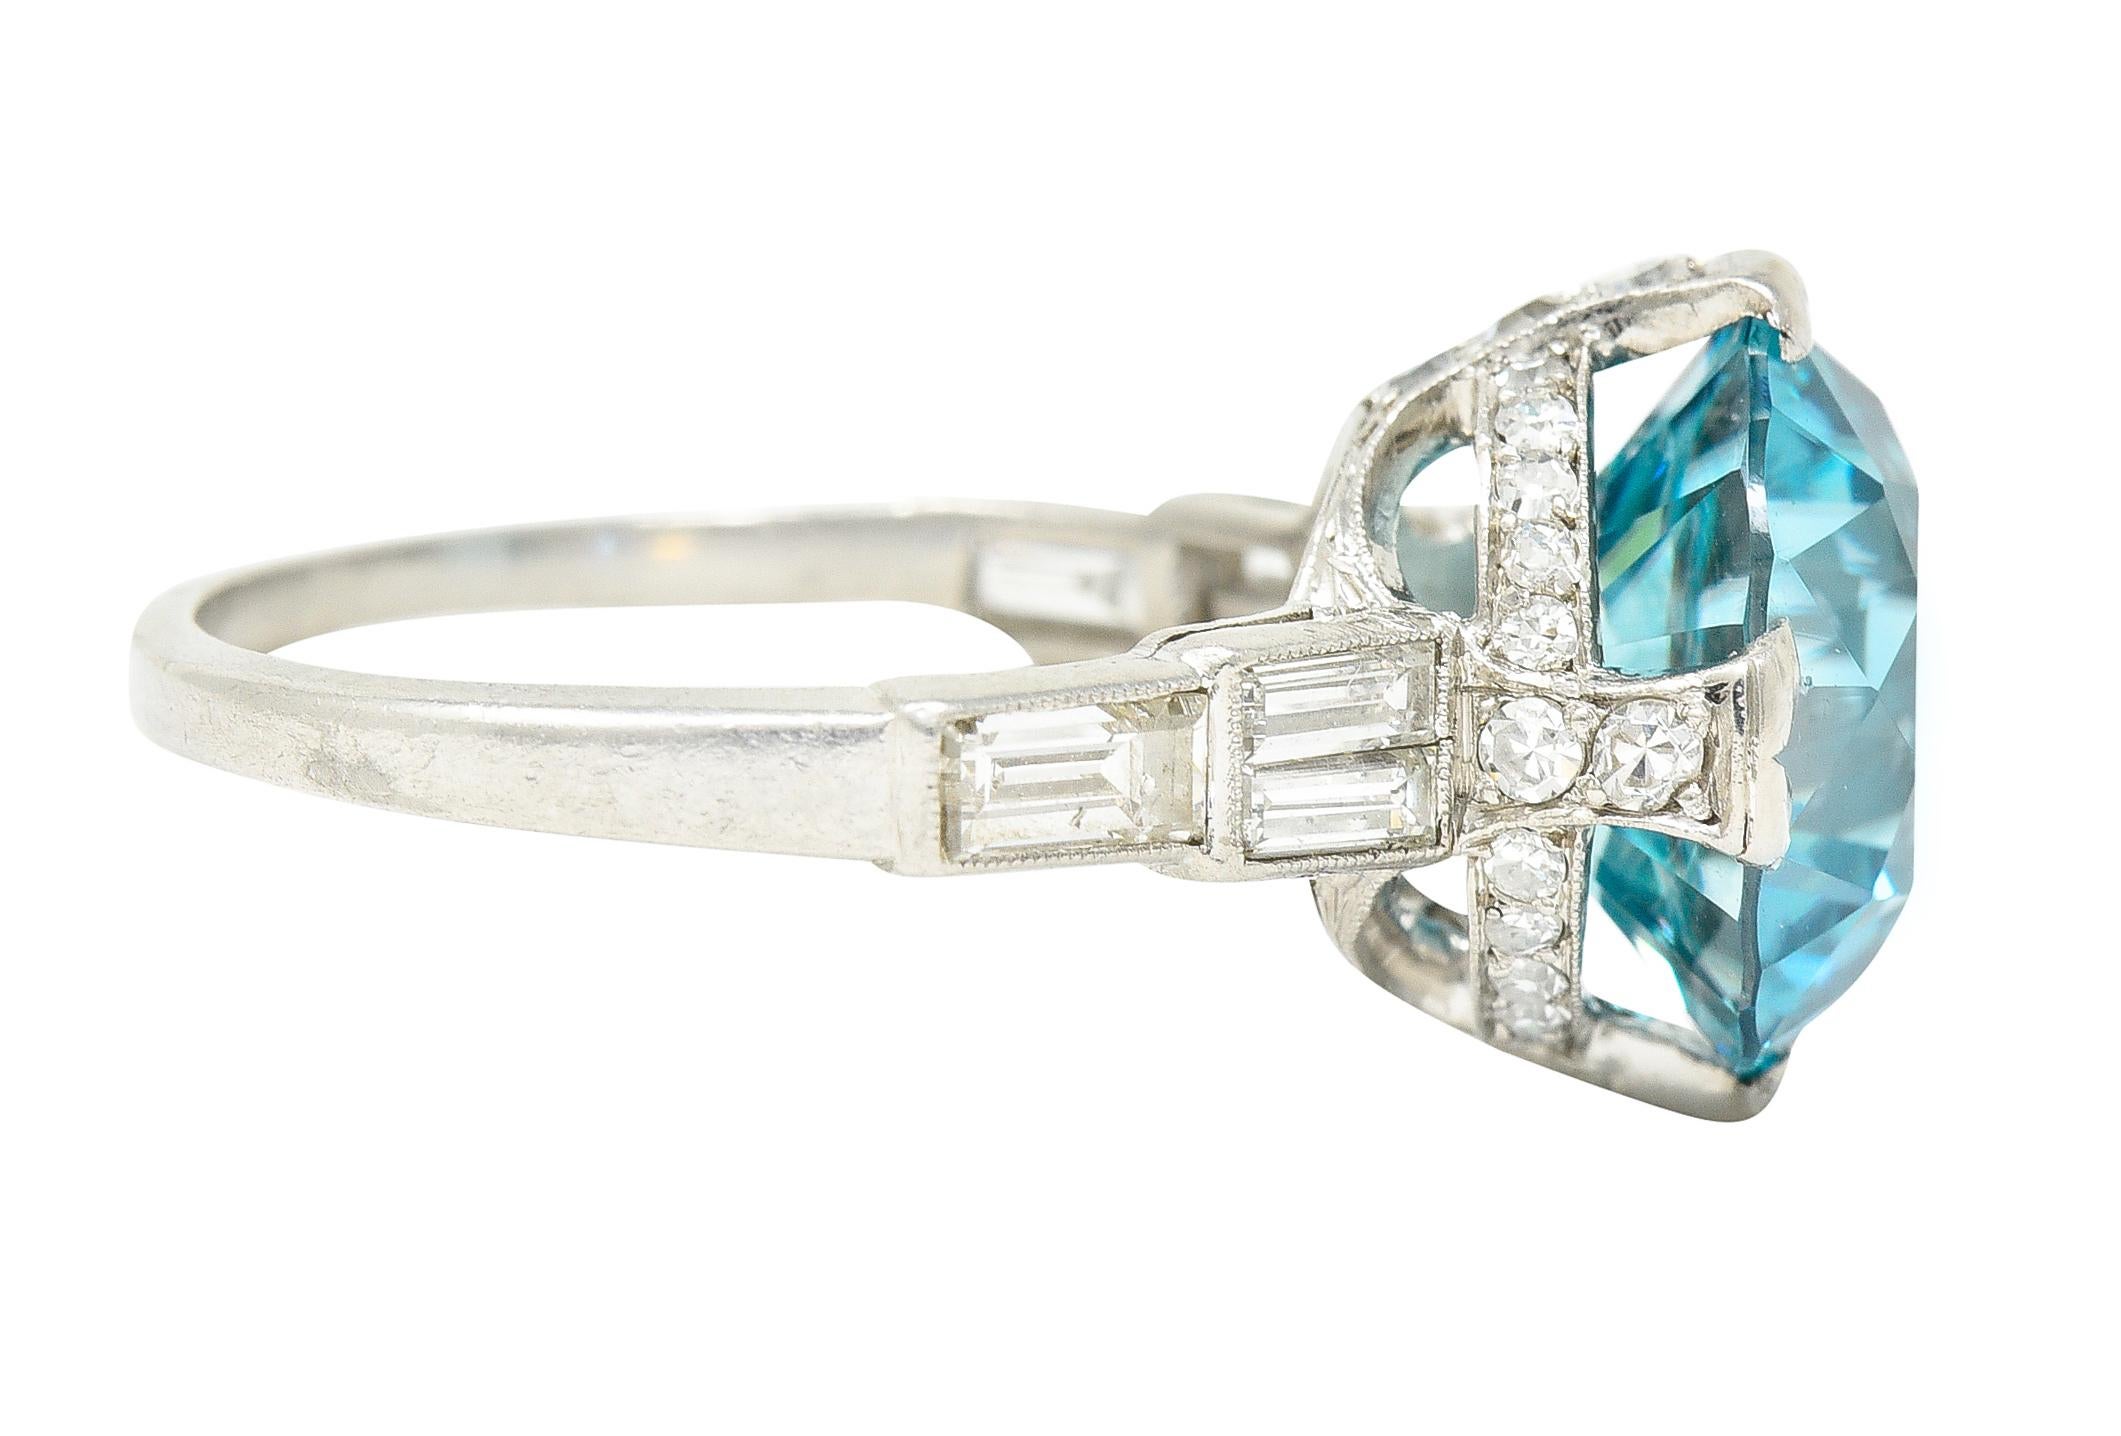 Art Deco 9.64 Carats Zircon Diamond Platinum Stepped Gemstone Cocktail Ring In Excellent Condition For Sale In Philadelphia, PA